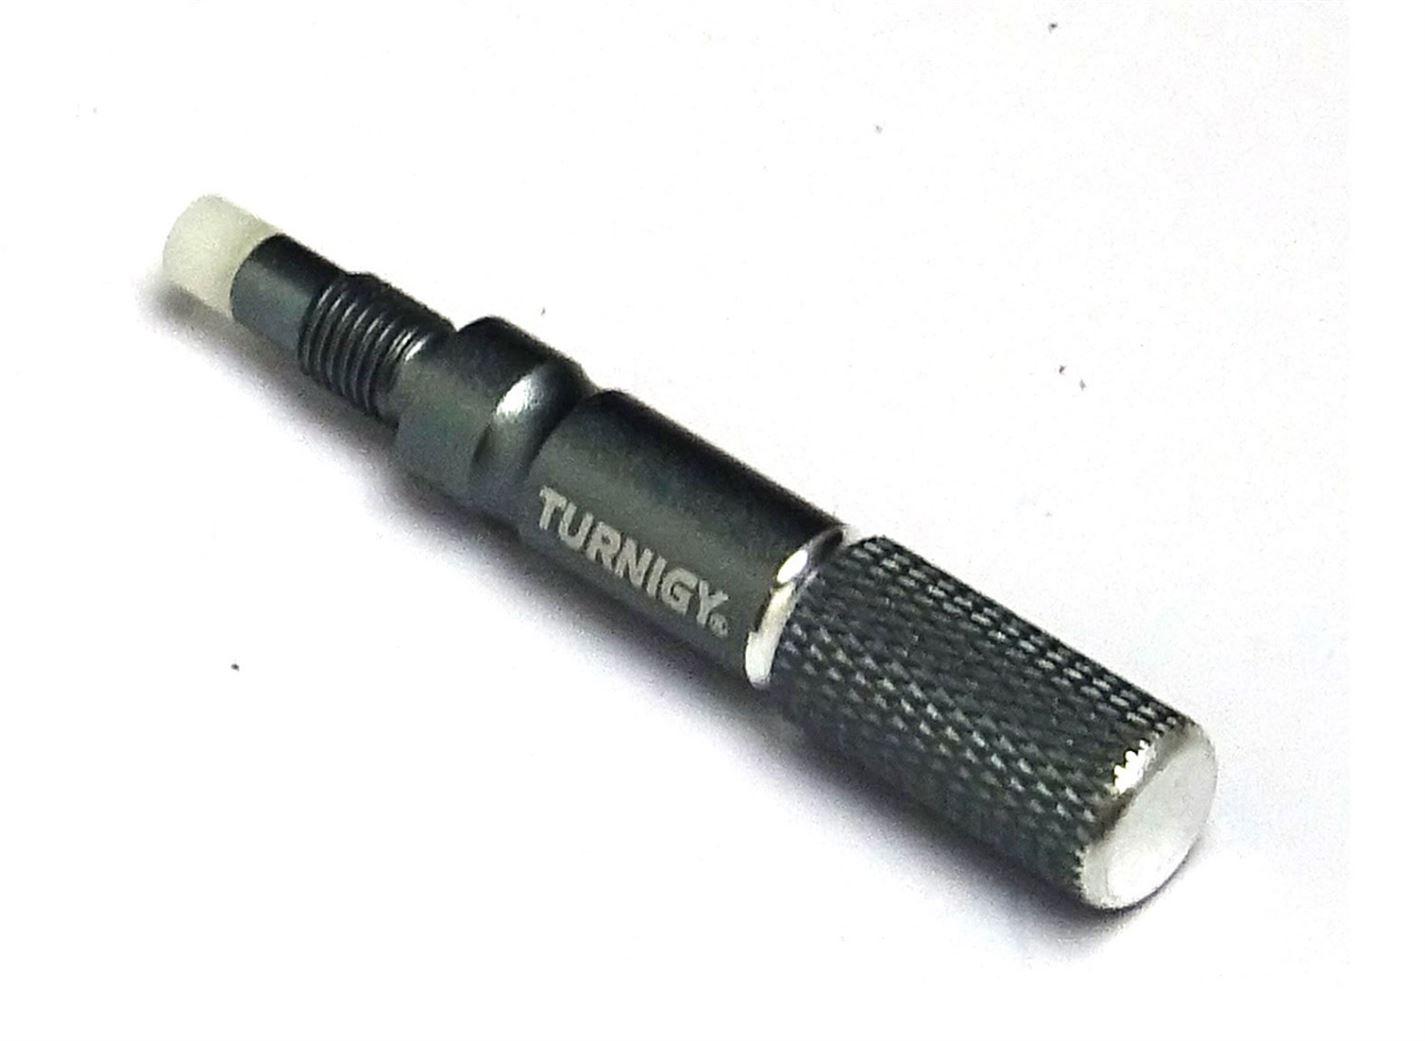 Turnigy Piston Stopper (1/4 - 32 UNEF) Fits all RC Nitro Engines - UK Seller